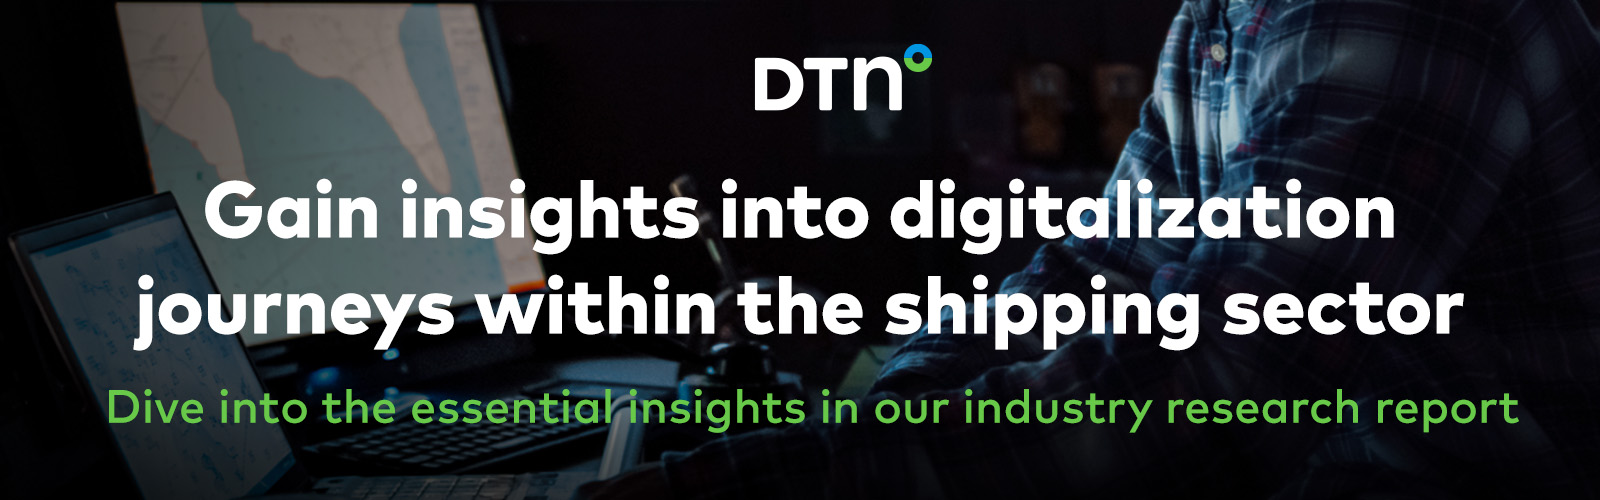 Gain insights into digitalization journeys within the shipping sector